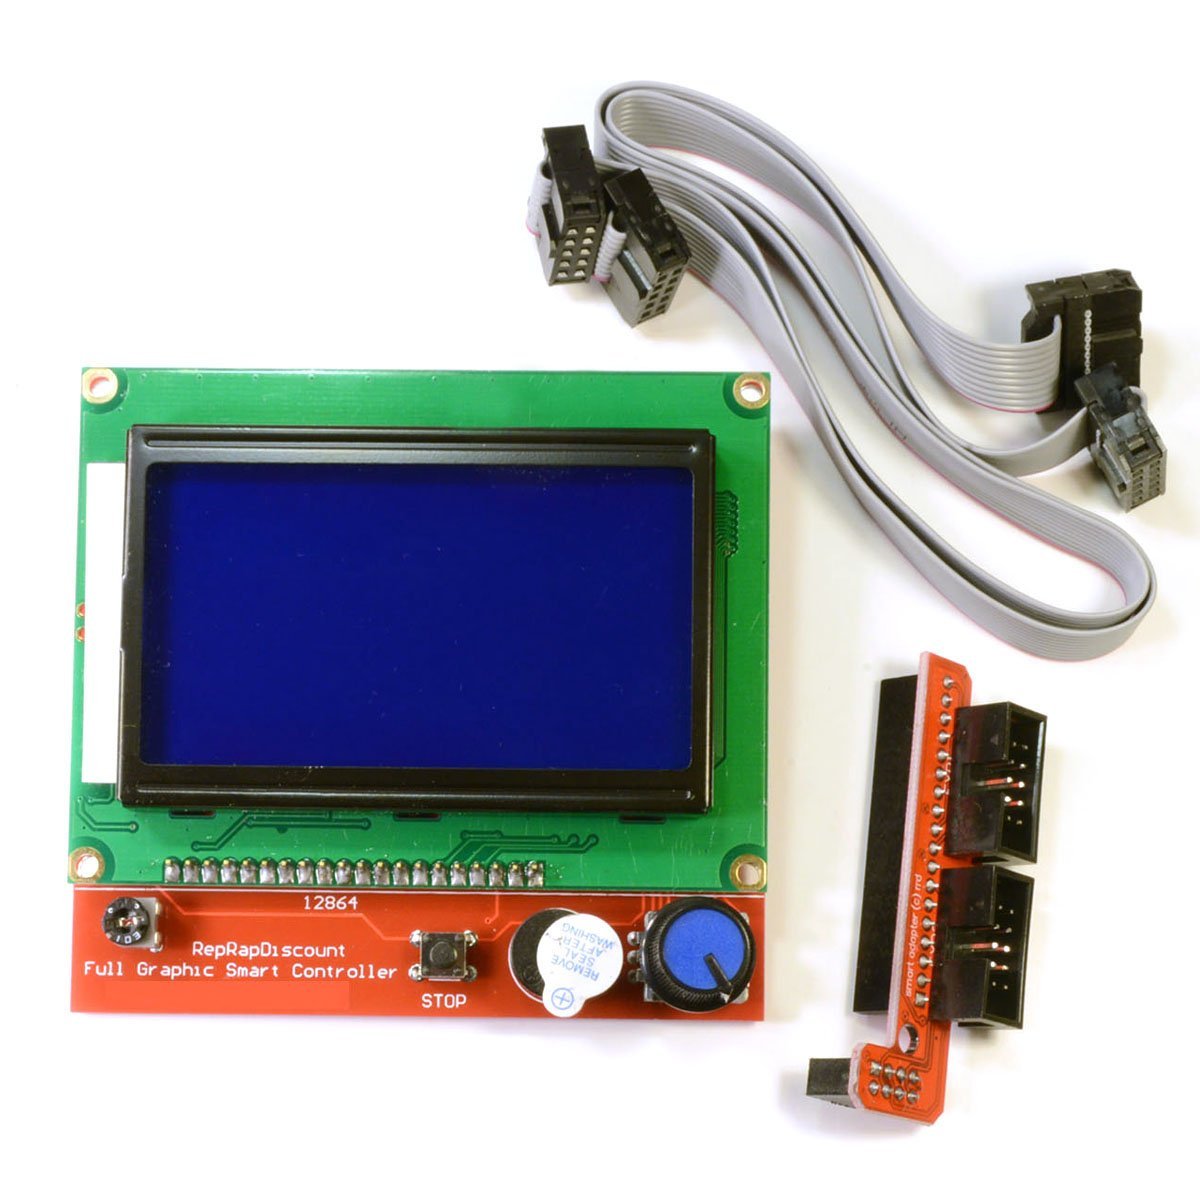 Full Graphic Smart Controller LCD Display for RAMPS 1.4 RepRap 3D Printer Electronics (12864 display with SD card reader)